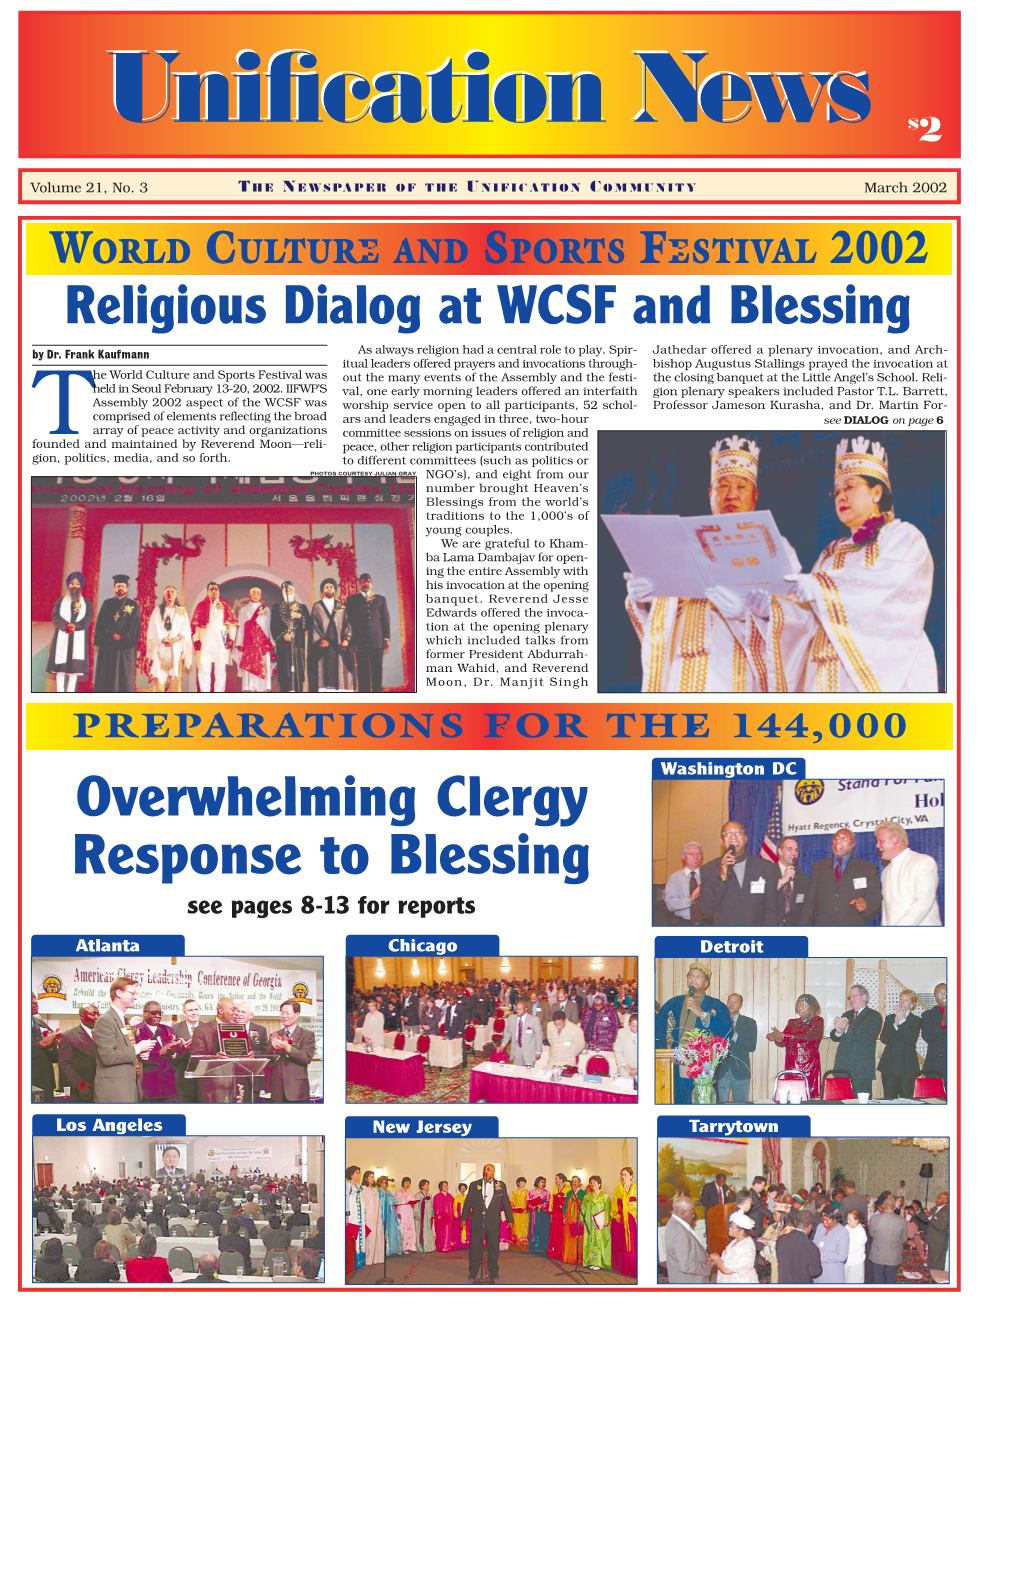 Overwhelming Clergy Response to Blessing See Pages 8-13 for Reports